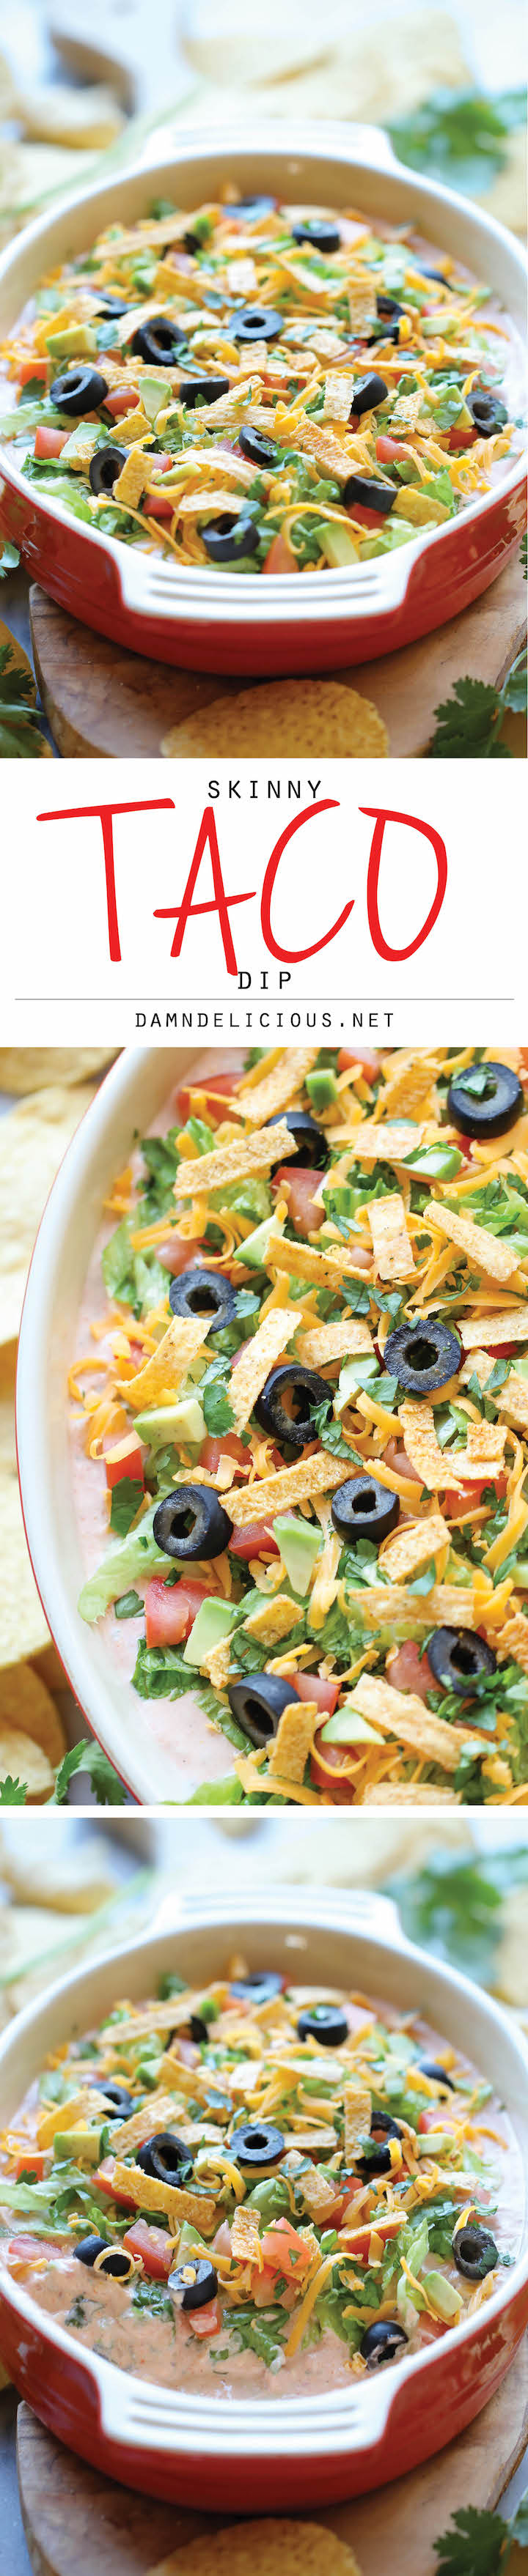 Skinny Taco Dip - Skip the guilt in this lightened up, super easy, 10-min taco dip. Perfect as a party appetizer for game day!